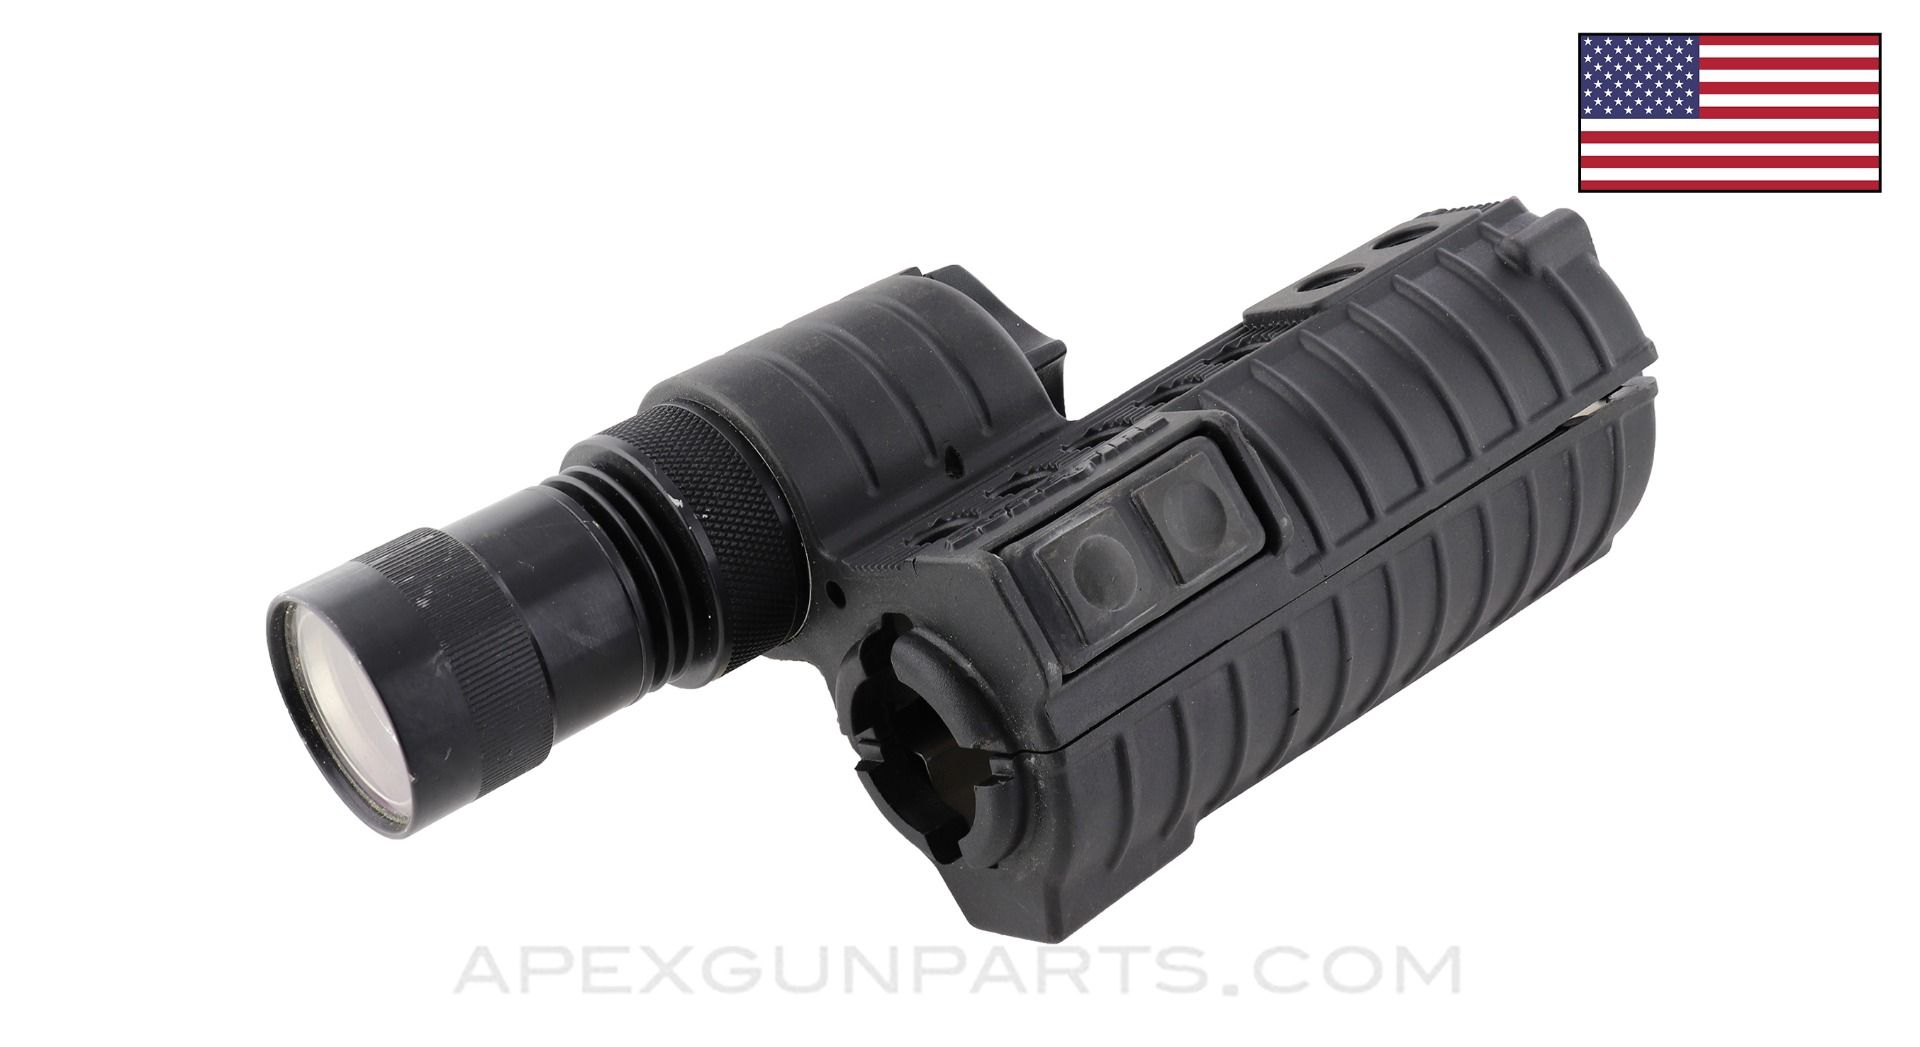 Surefire M500A CAR15 / M4 Carbine Dedicated Forend Light, Early 